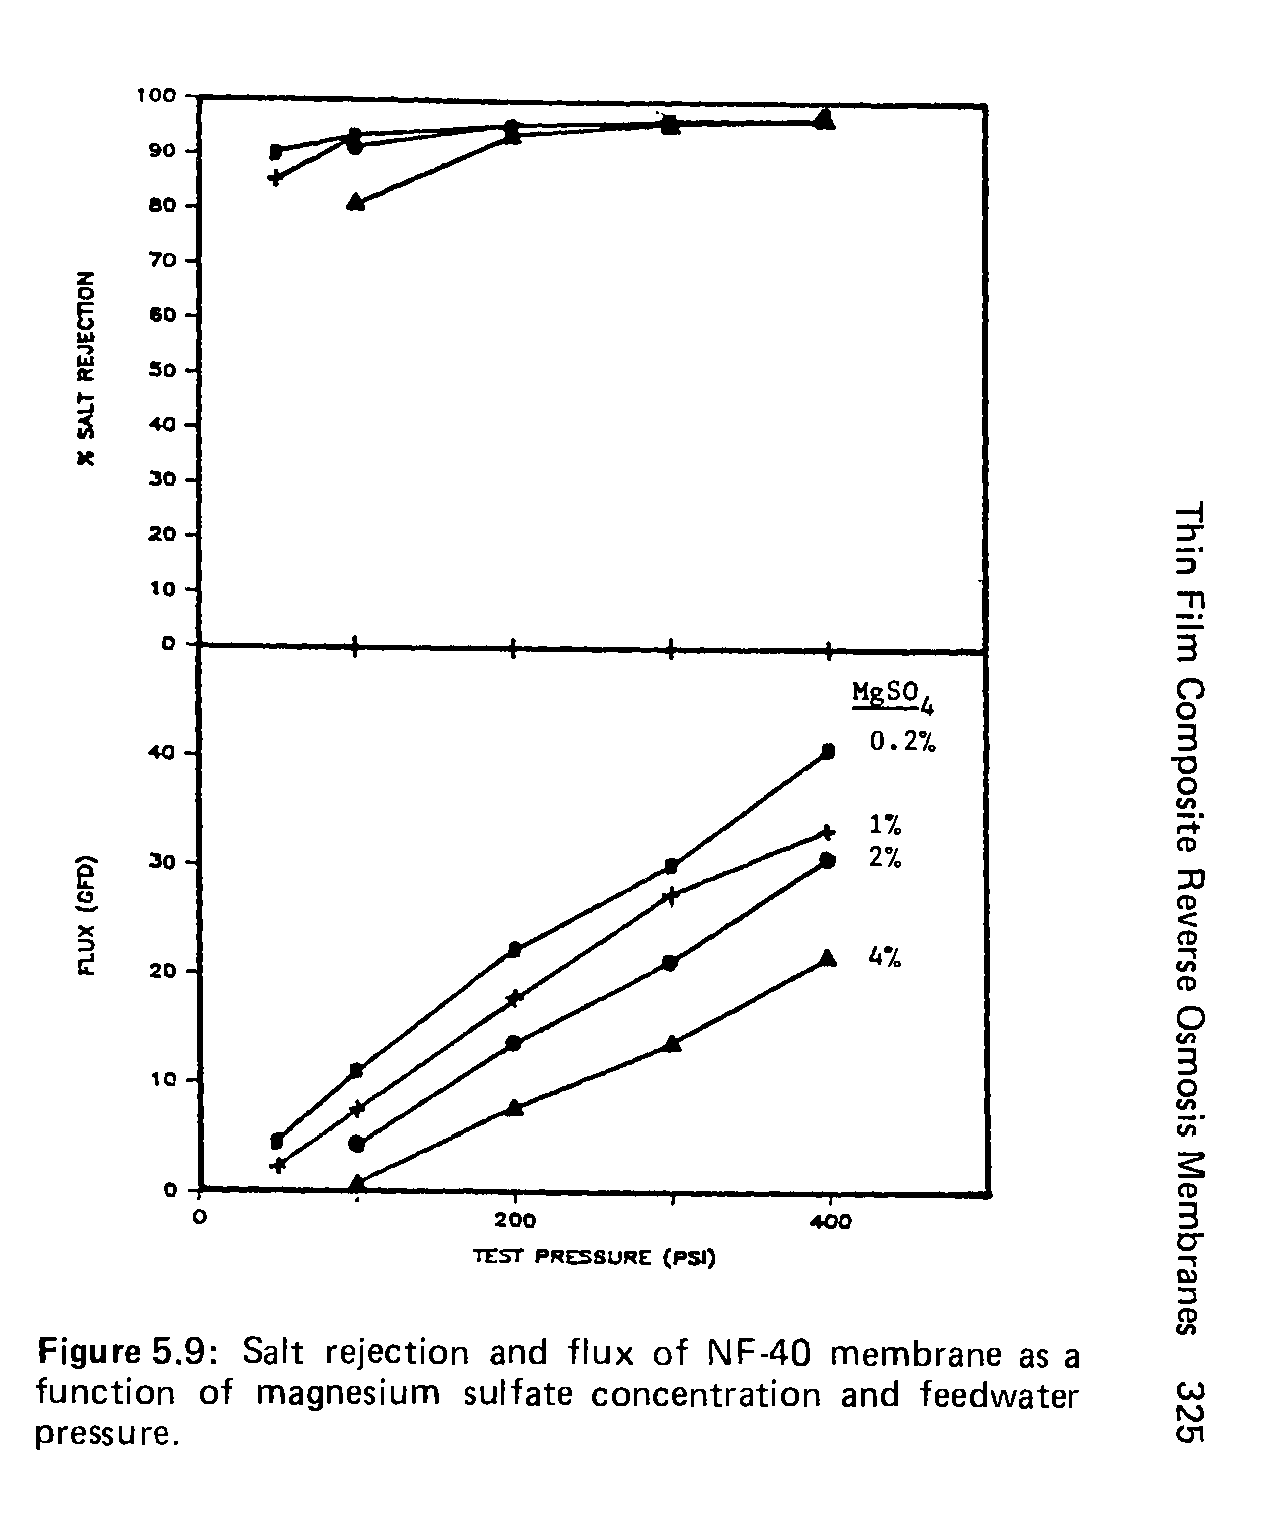 Figure 5.9 Salt rejection and flux of NF-40 membrane as a function of magnesium sulfate concentration and feedwater pressure.